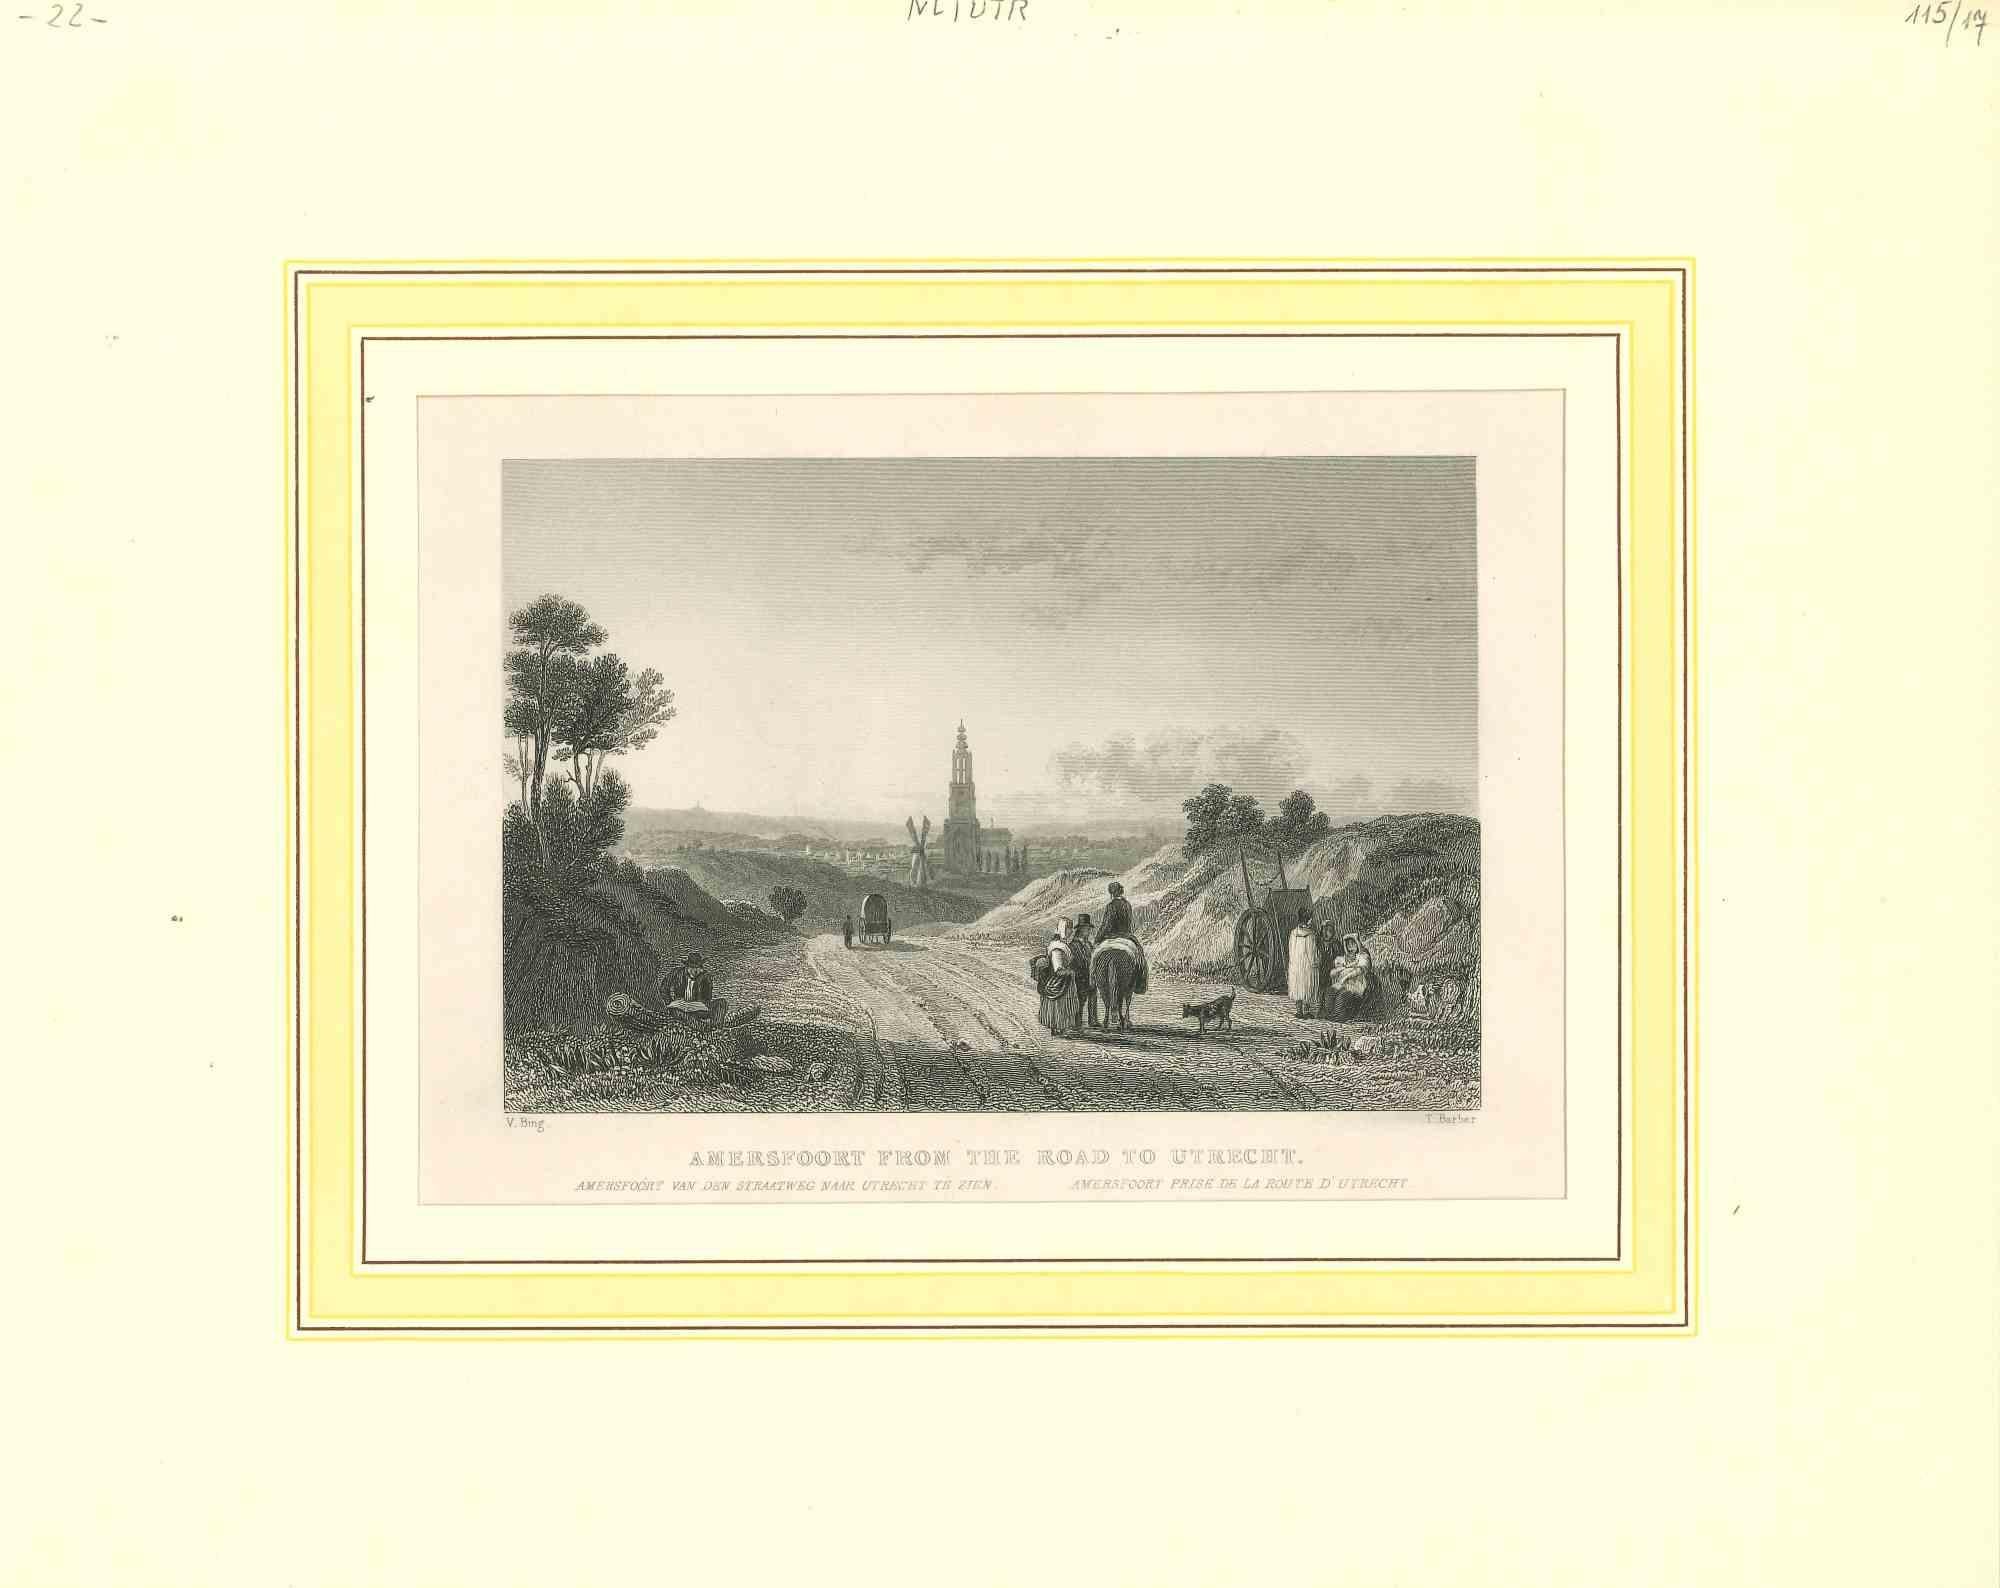 Unknown Landscape Print - Ancient View of Amersfoort Original Lithograph on Paper - Early 19th Century